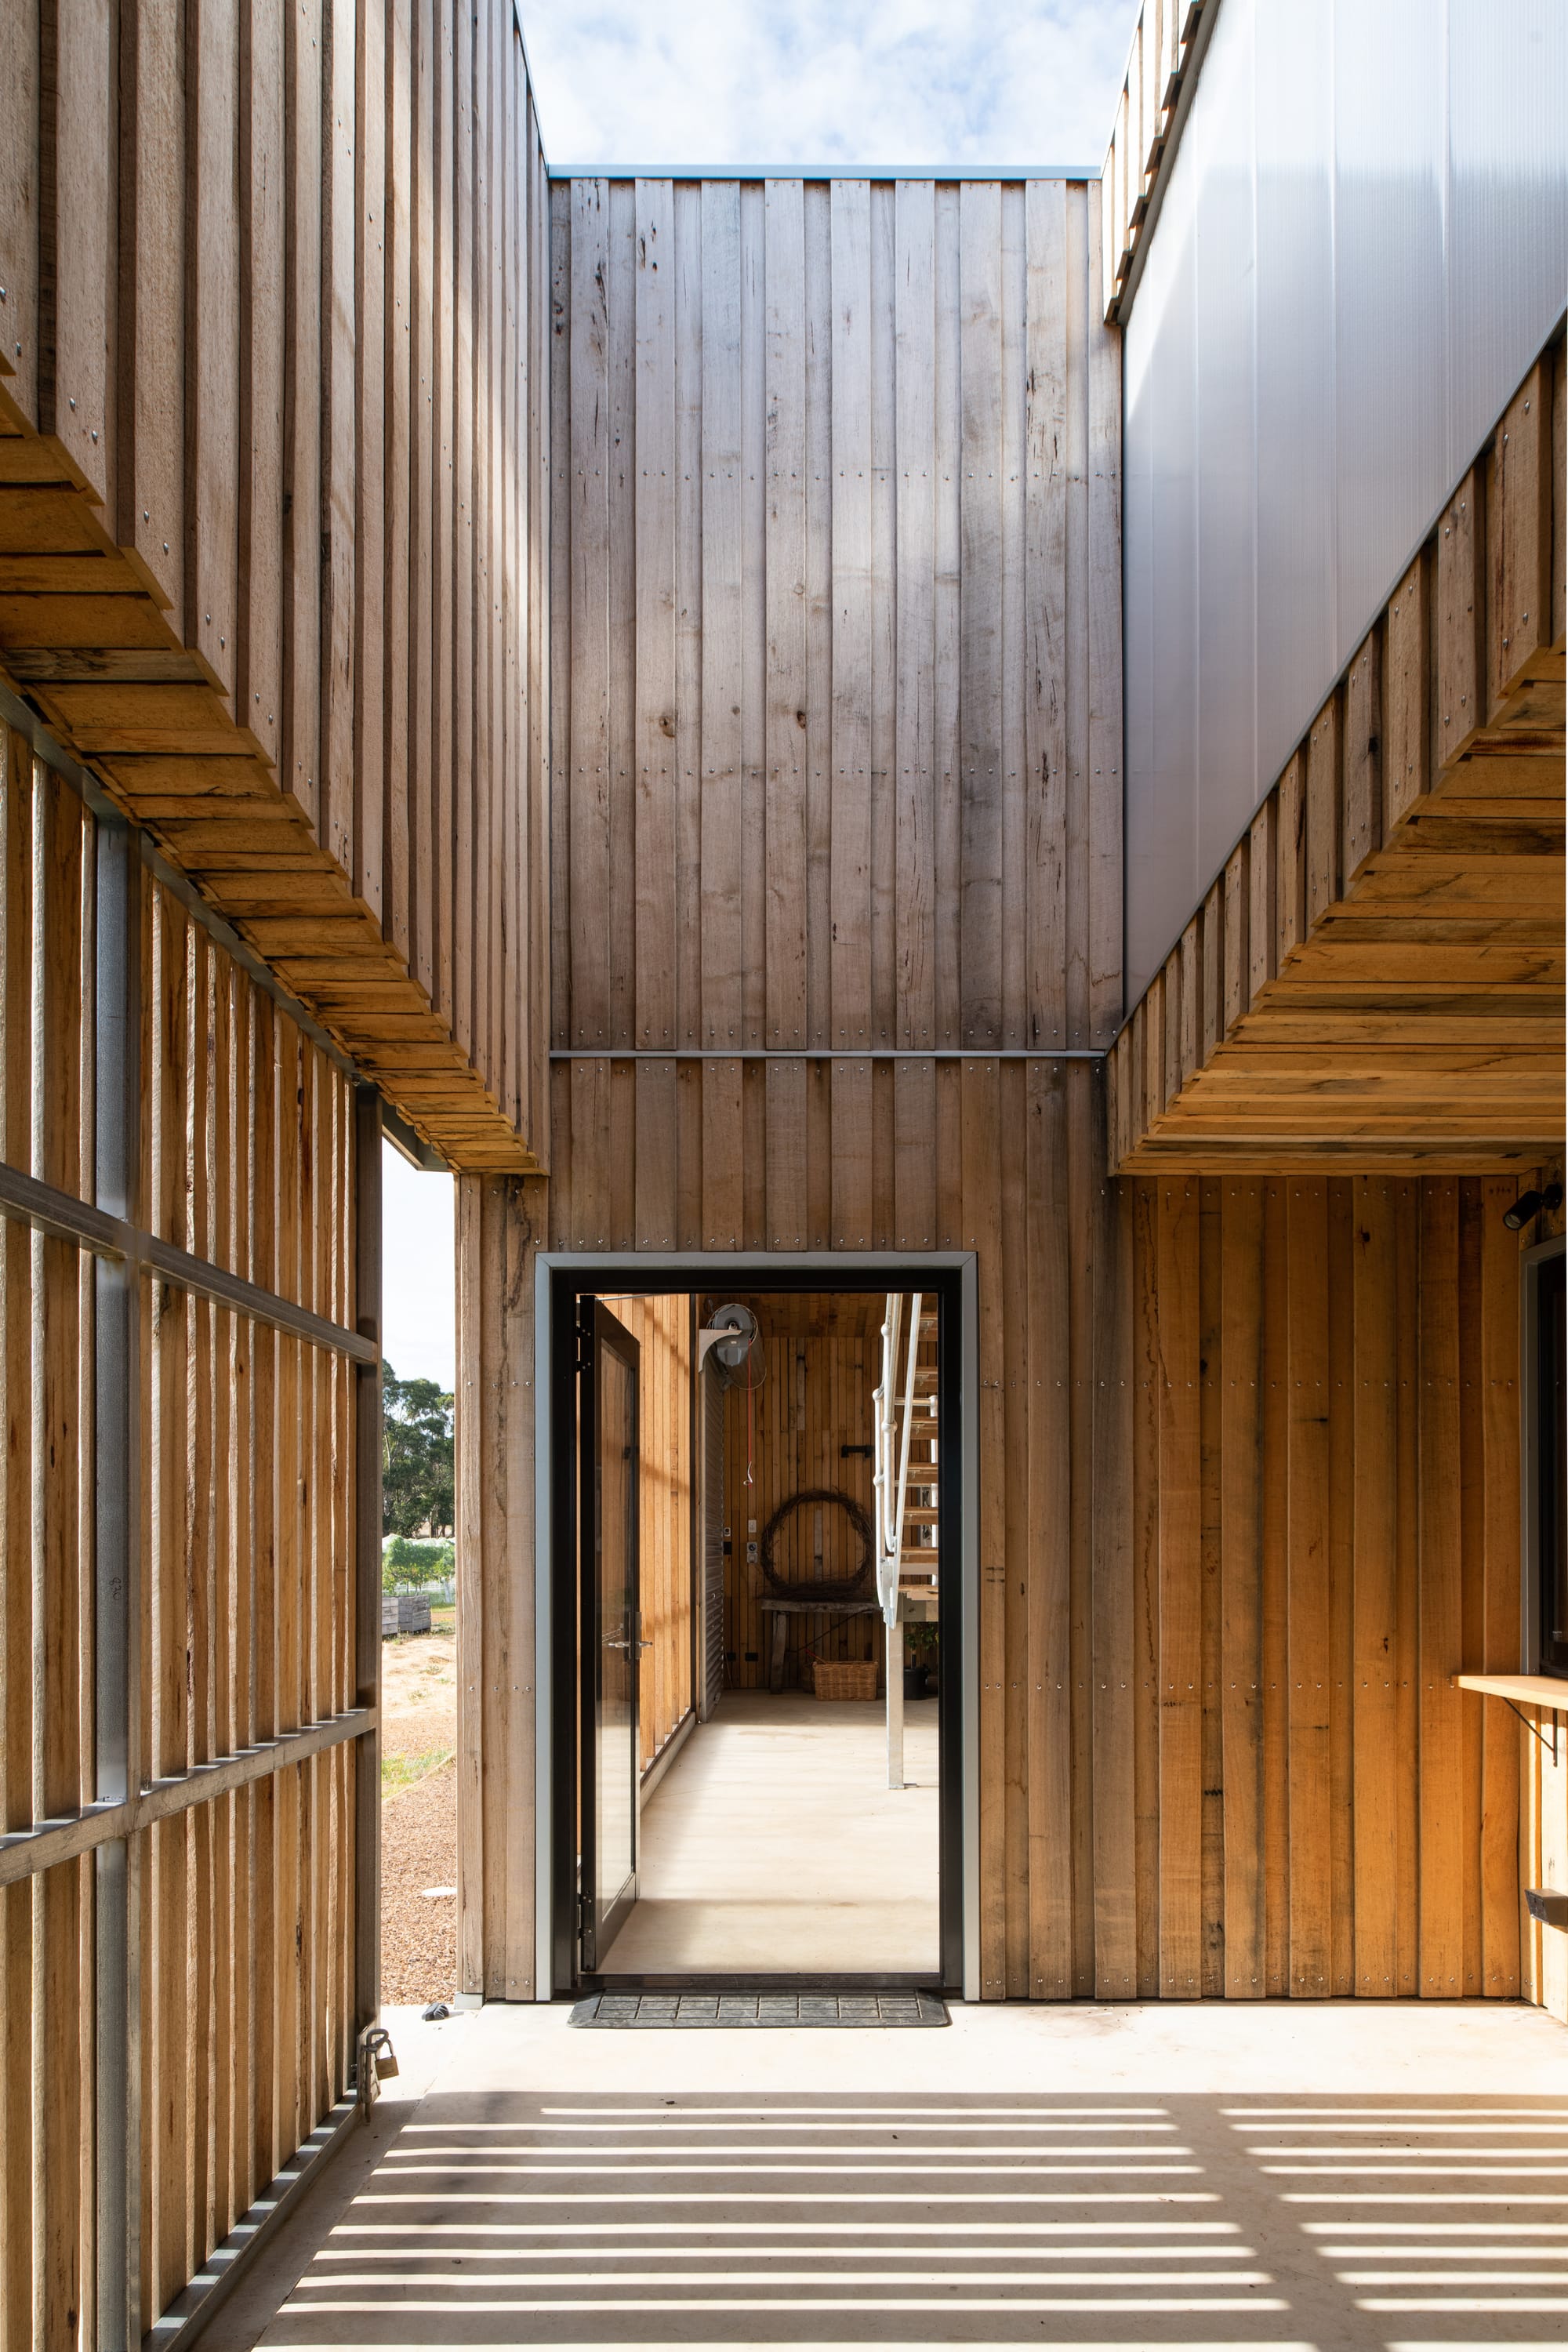 Tasmanian Timber Series: Westella Vineyard.Interior hallway of Westella Vineyard with walls and ceiling lined in natural Tasmanian Oak, leading to a well-lit room with visible wine barrels, showcasing a harmonious blend of wood and light.